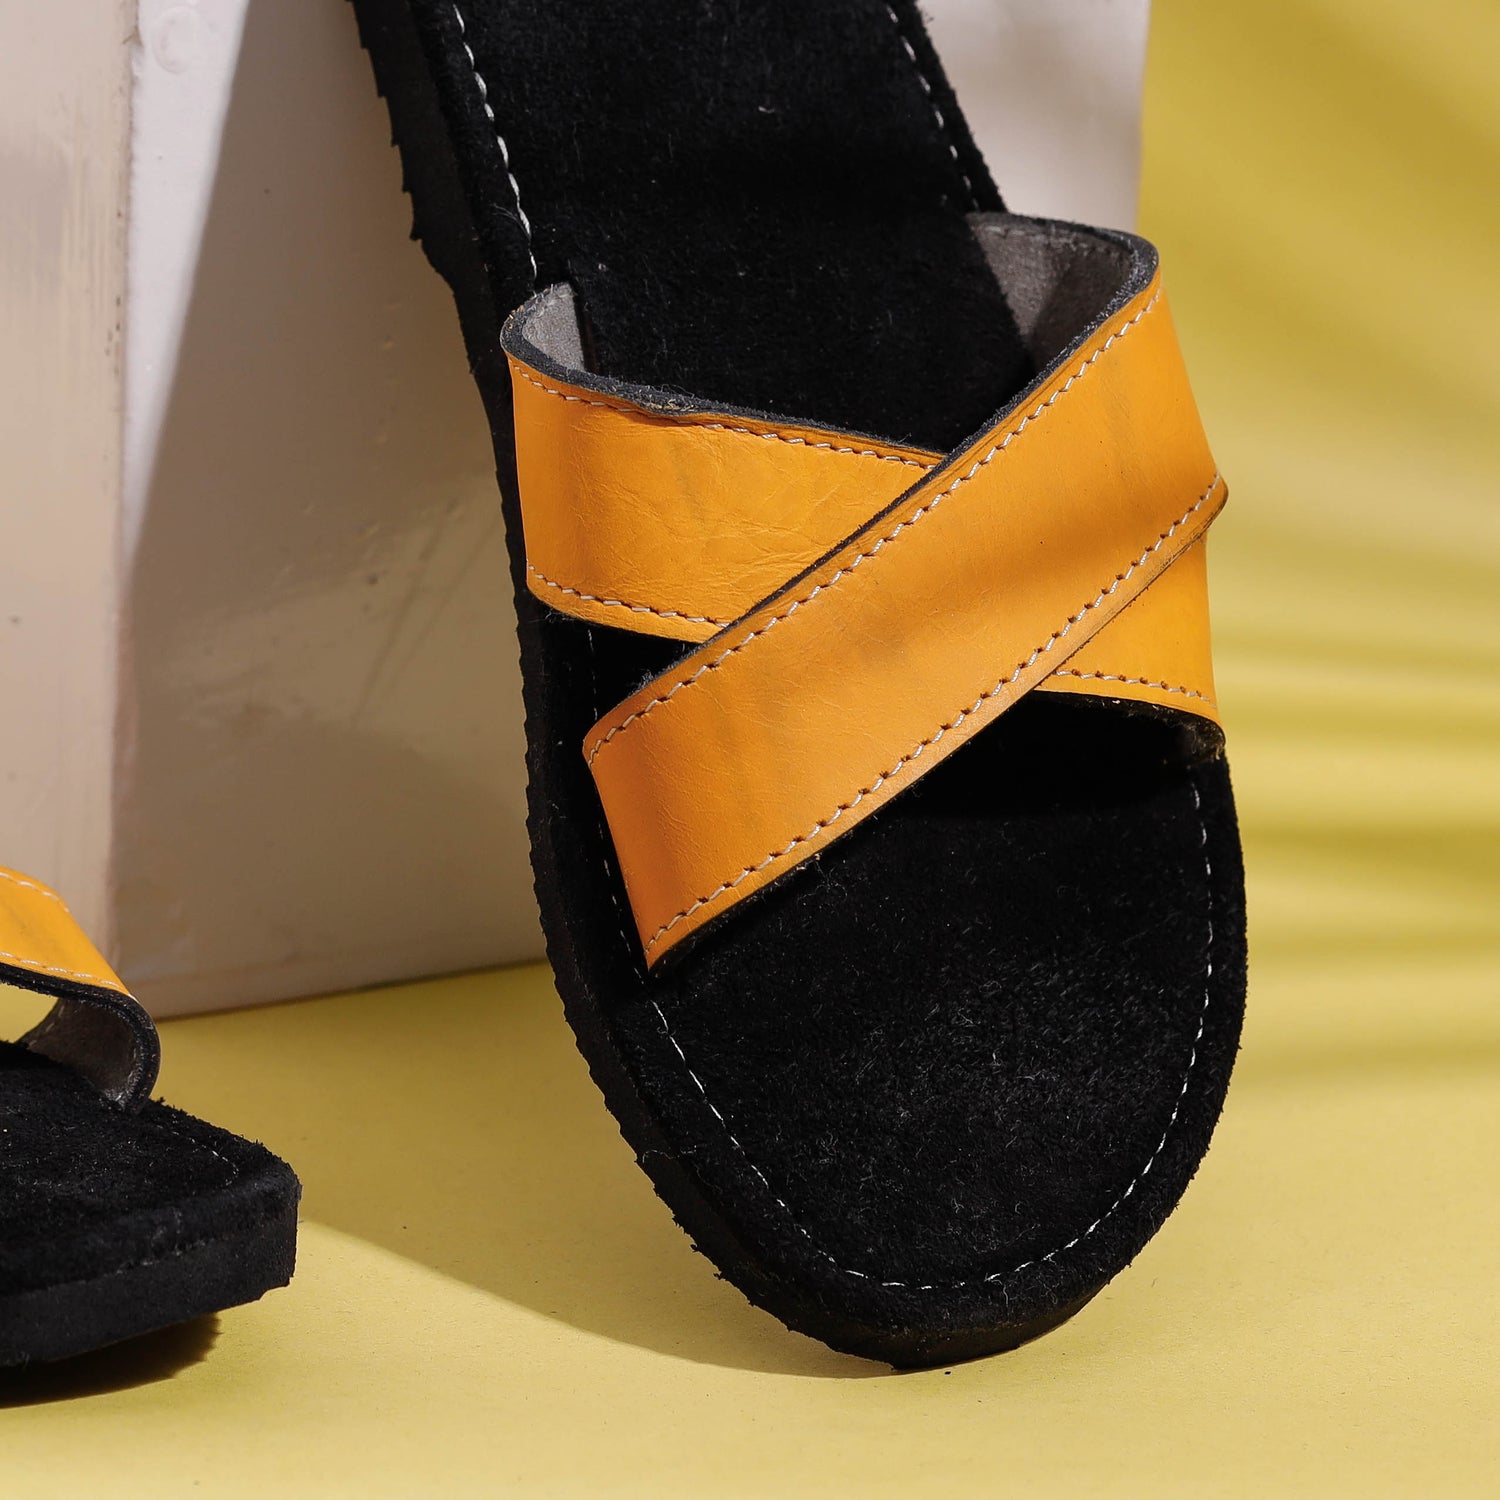 Black & Yellow Handcrafted Women's Leather Slippers with Suede